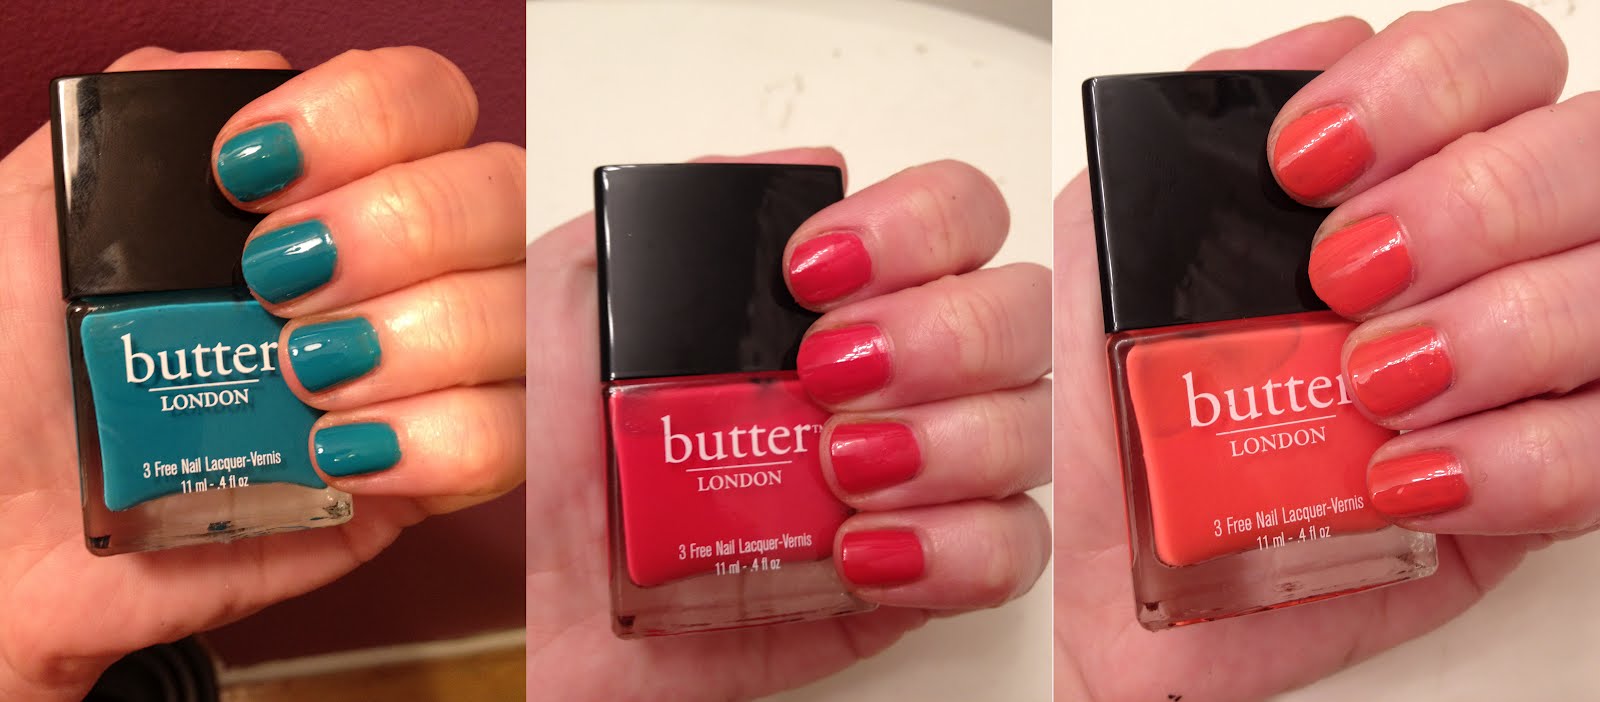 Butter London Nail Lacquer in "Palm Springs Paradise" - wide 4